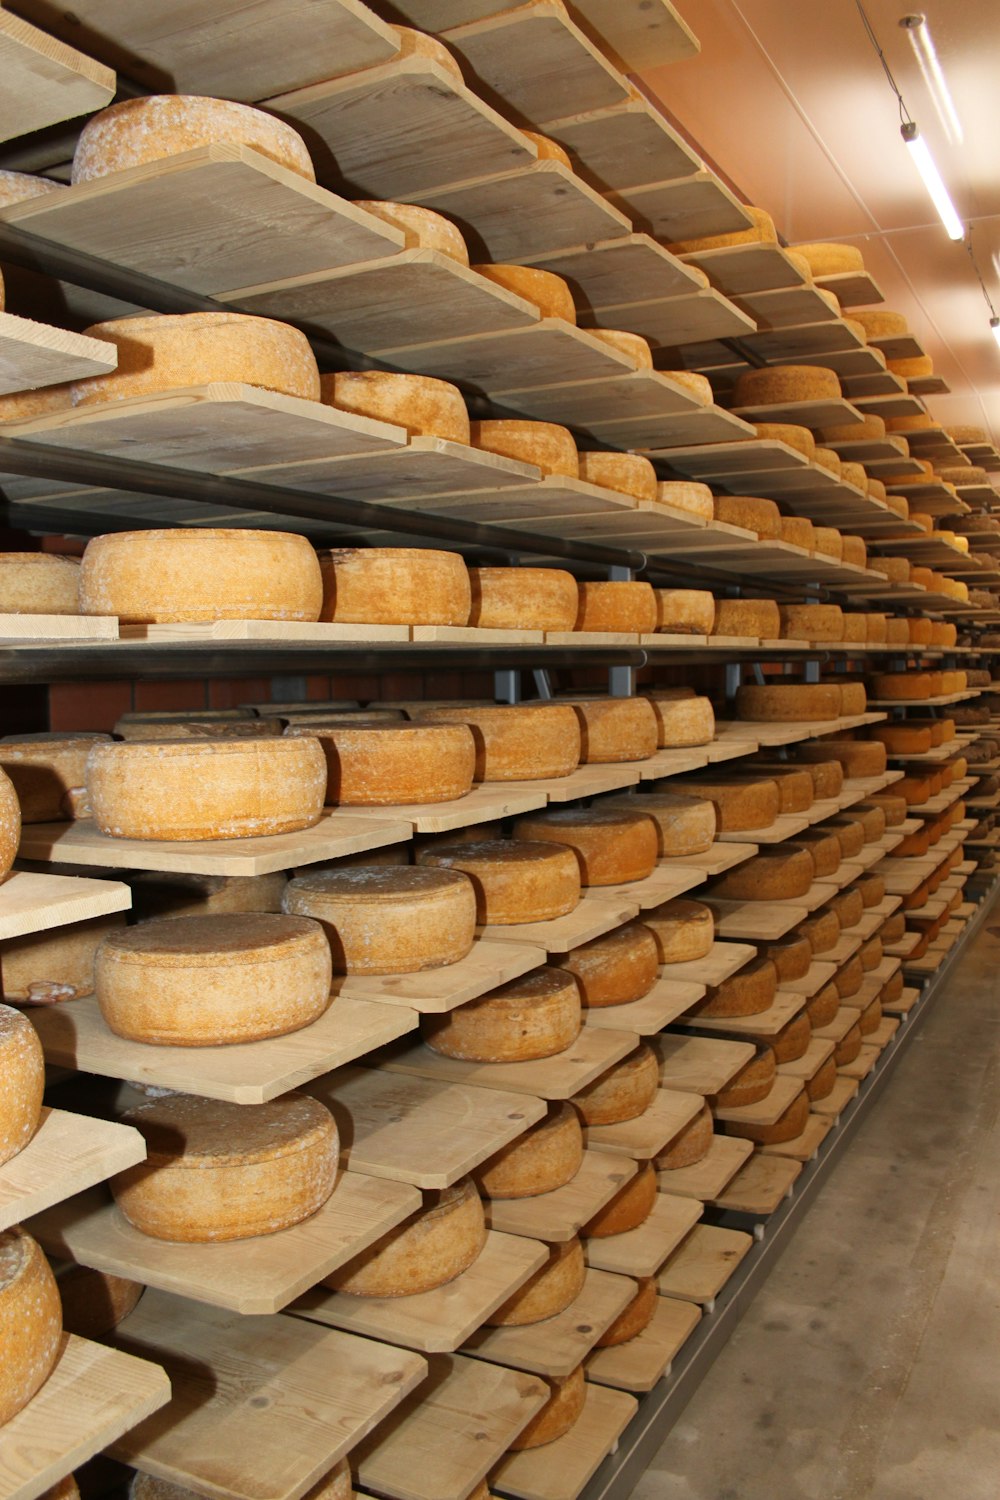 a large number of cheeses are stacked on shelves